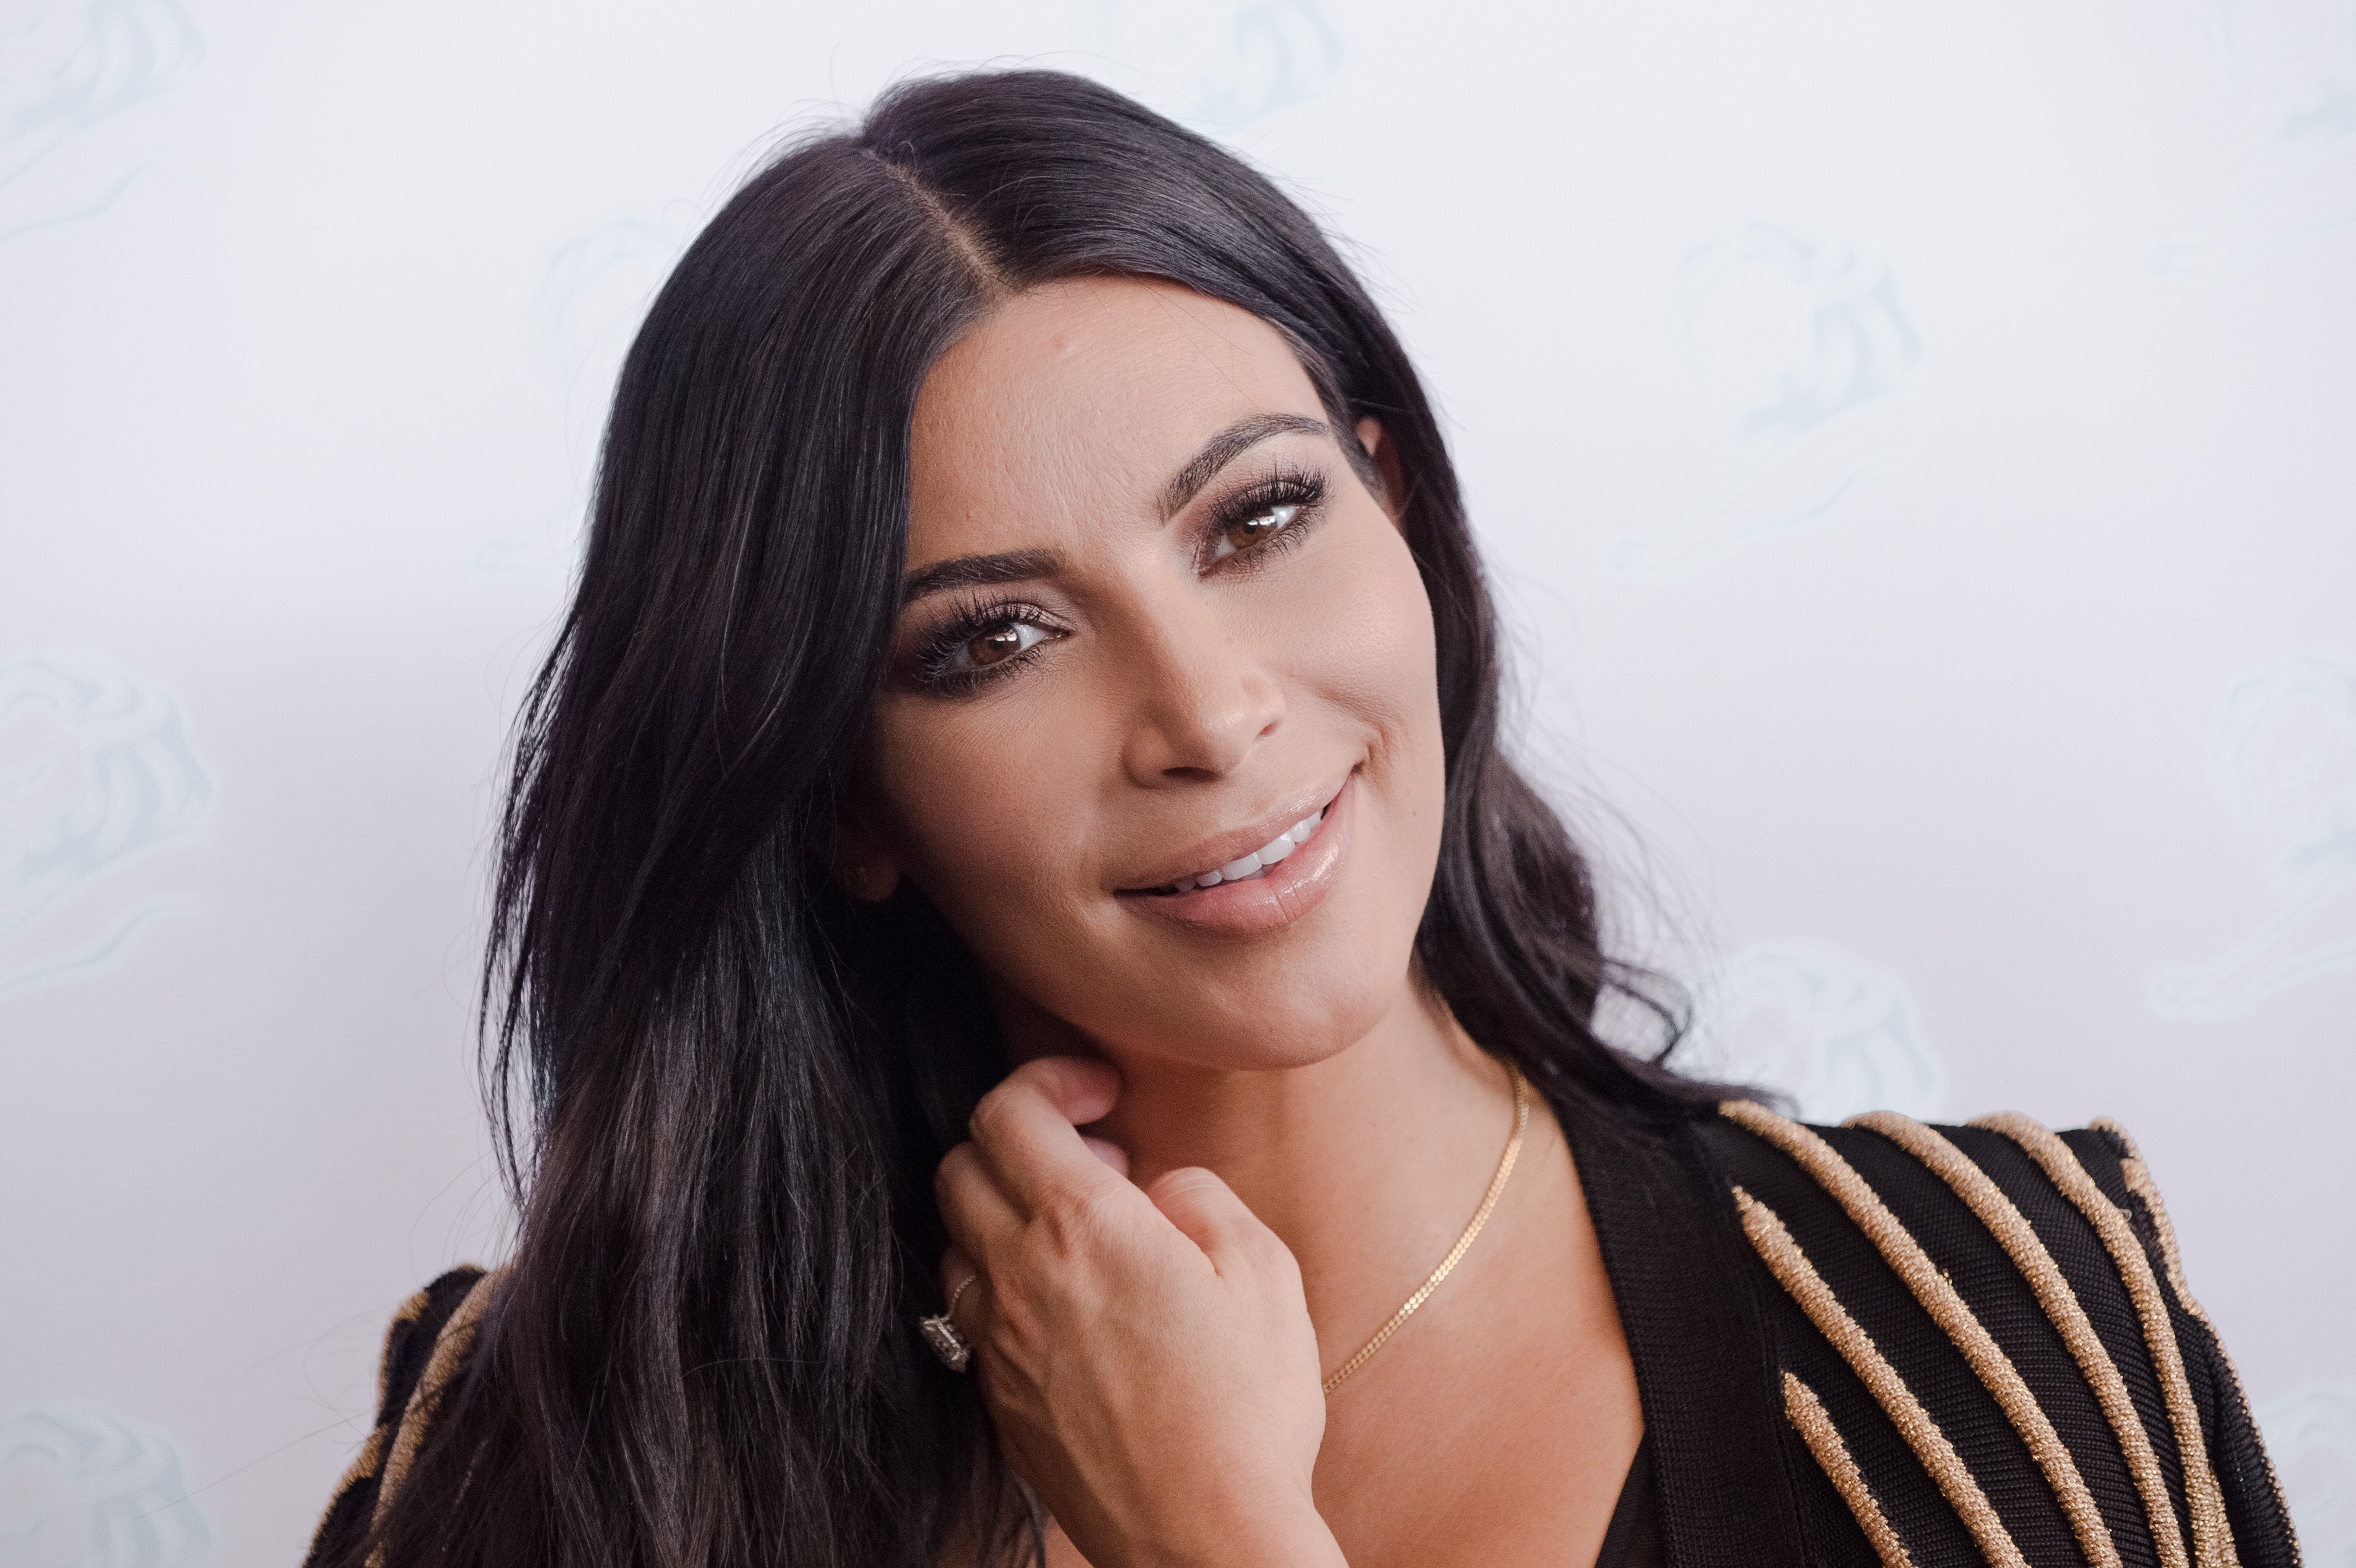 Kim Kardashian during the fourth day of the Cannes Lions International Festival in 2015. | Photo: Getty Images